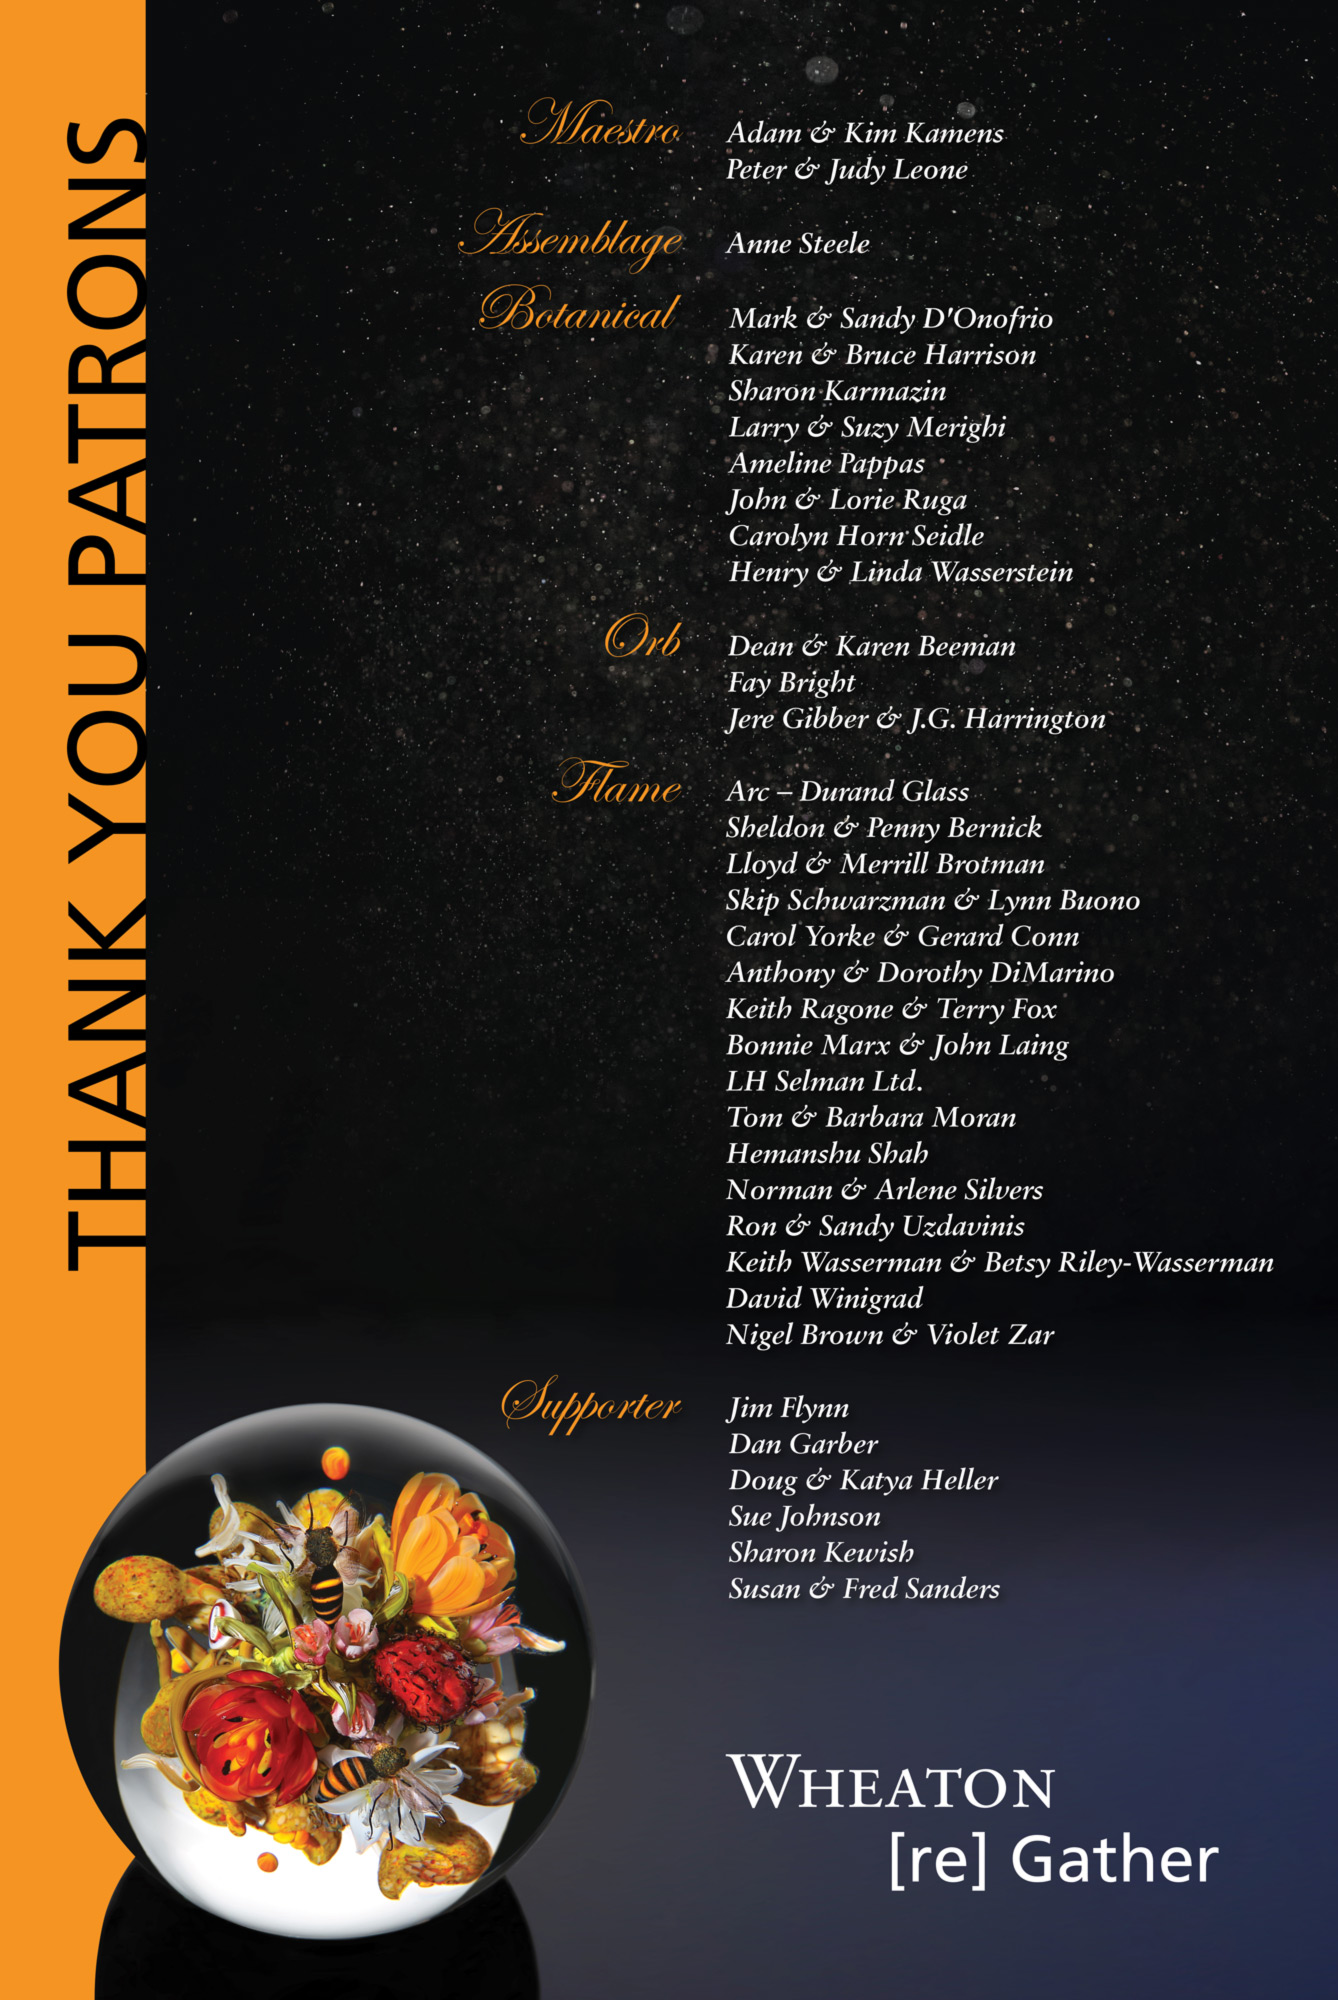 Image of the Wheaton [re] Gather Thank You card. There is an orange vertical stripe down the left side of the image with black text that says "Thank You Patrons". A Paul Stankard paperweight is pictured in the bottom left corner on a dark gray background. There is also white text that reads "Wheaton [re] Gather" in the bottom right corner. The upper half of the image is black with light gray speckles. Orange and white script is overtop of the background, flowing down into the dark gray. The text lists the patrons by name and their level of patronage.